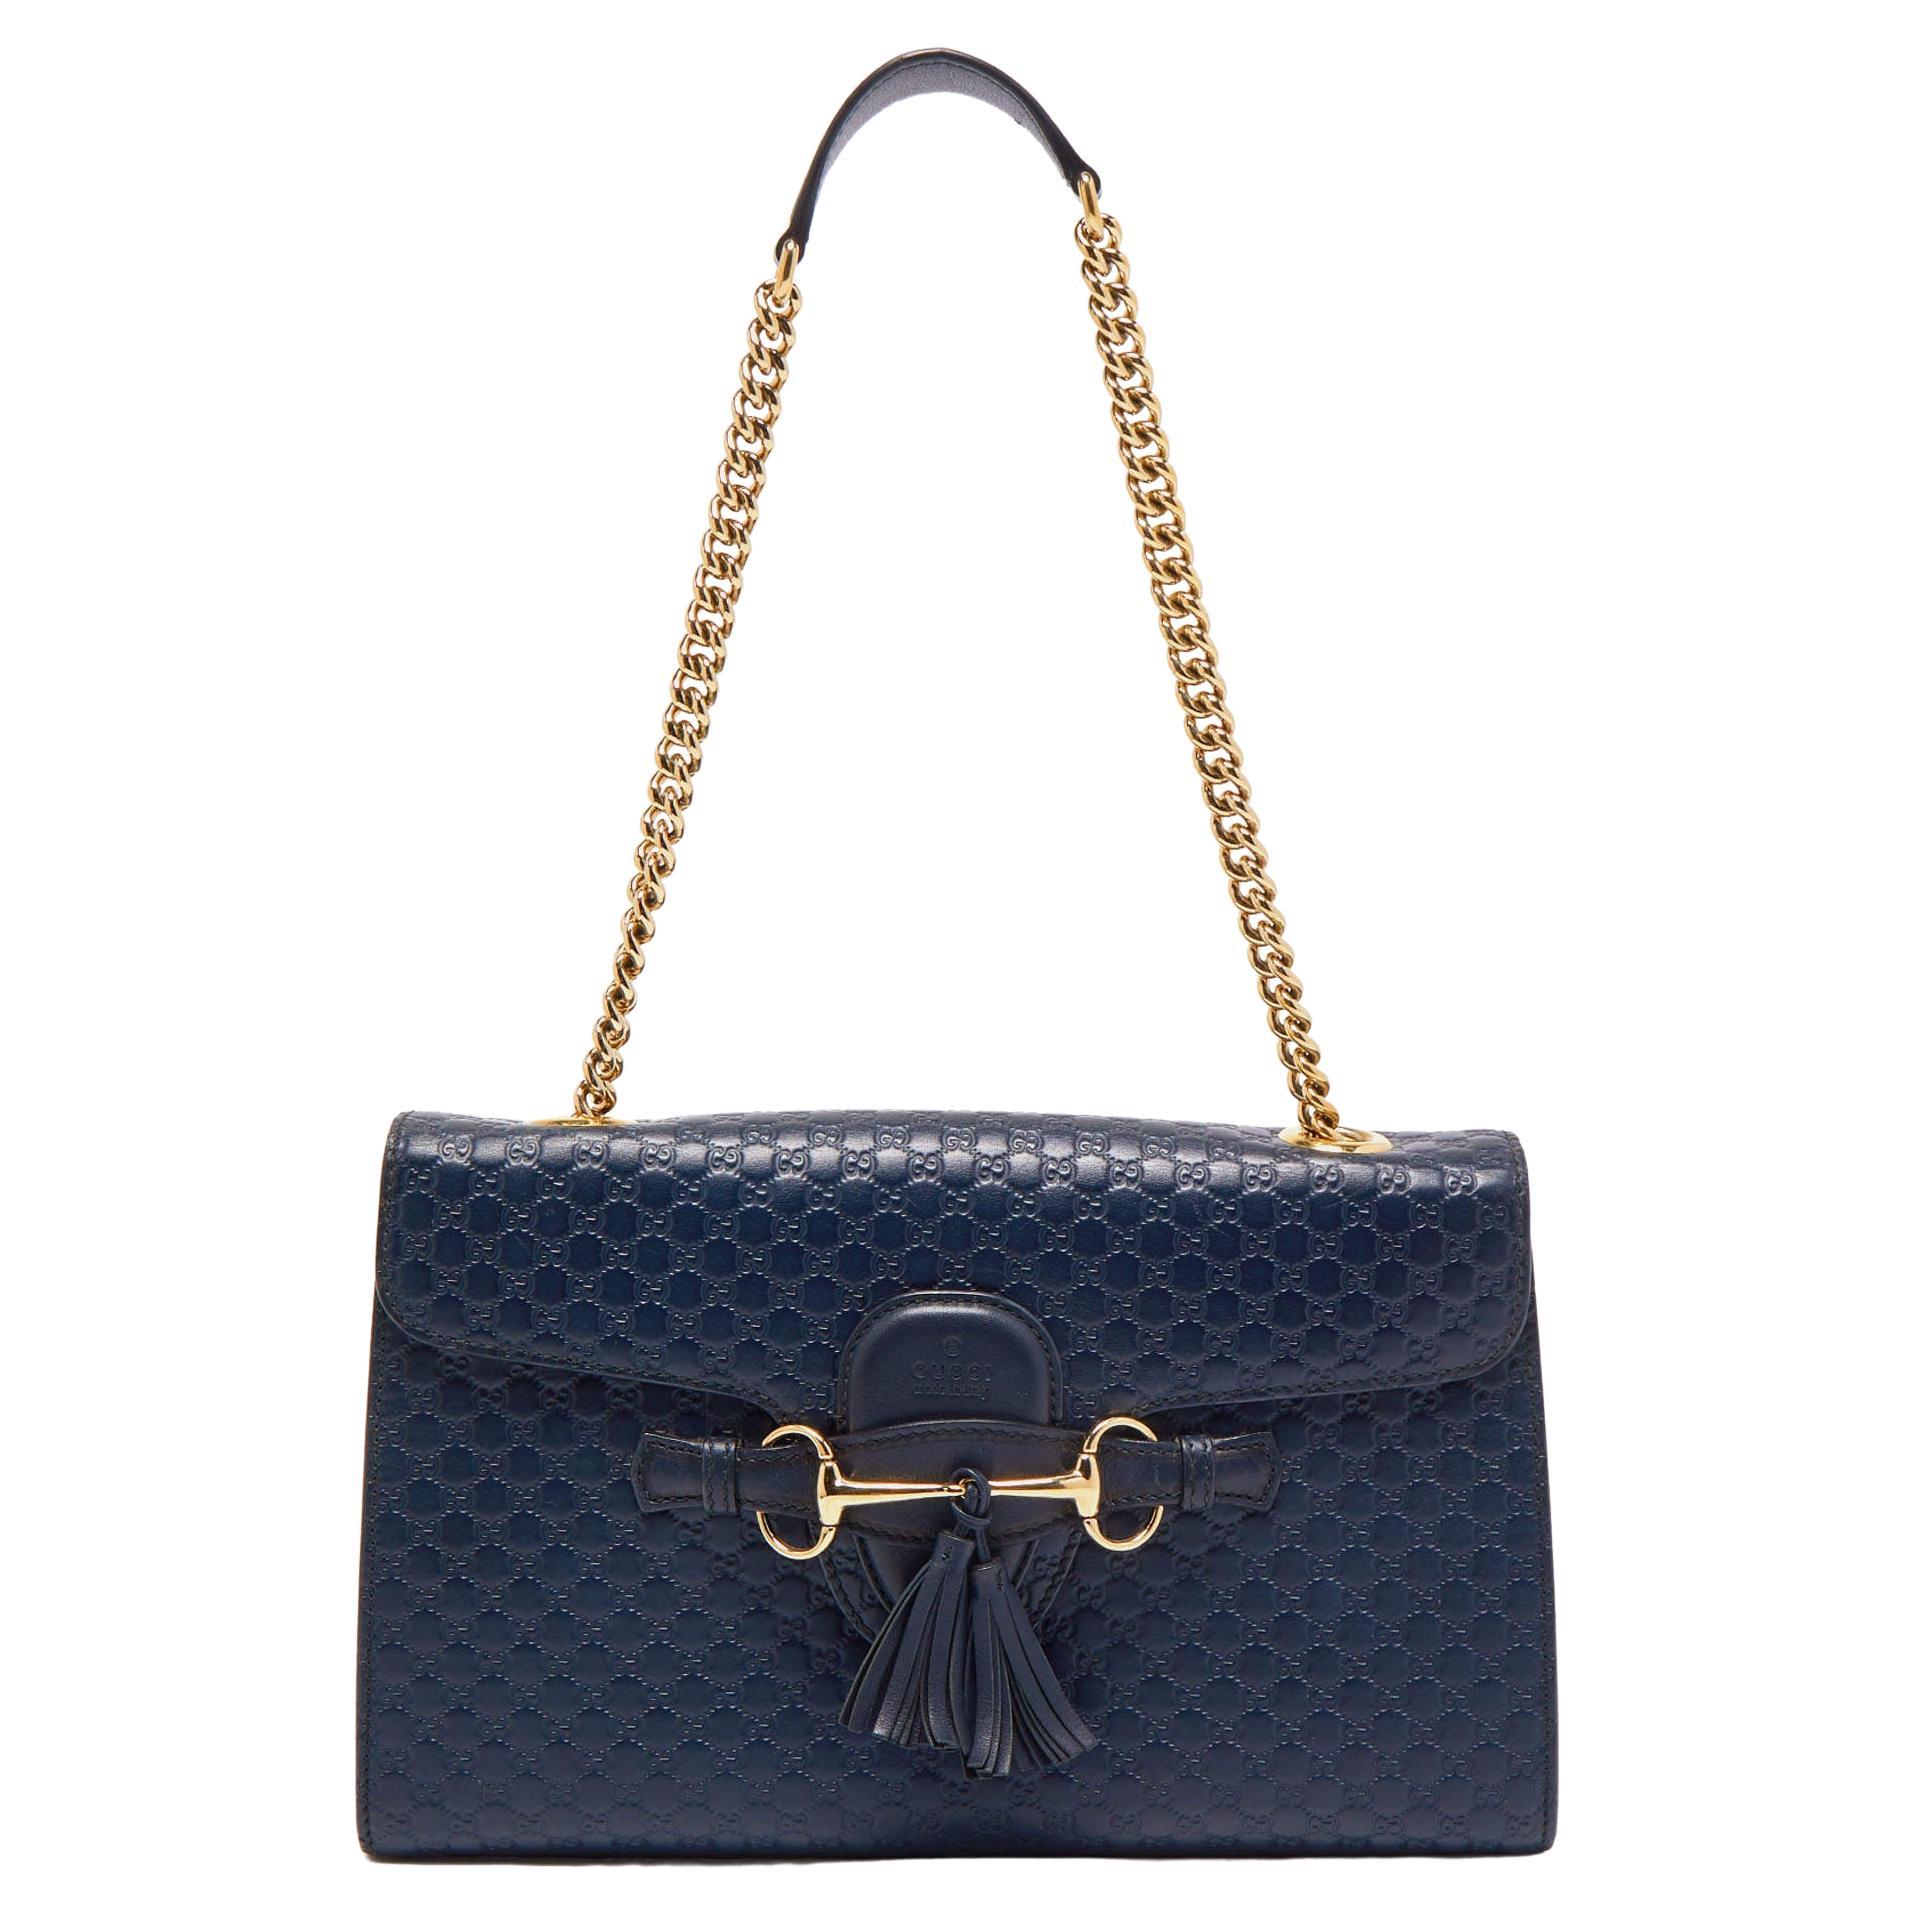 Gucci Navy Blue Microguccissima Leather Medium Emily Chain Shoulder Bag